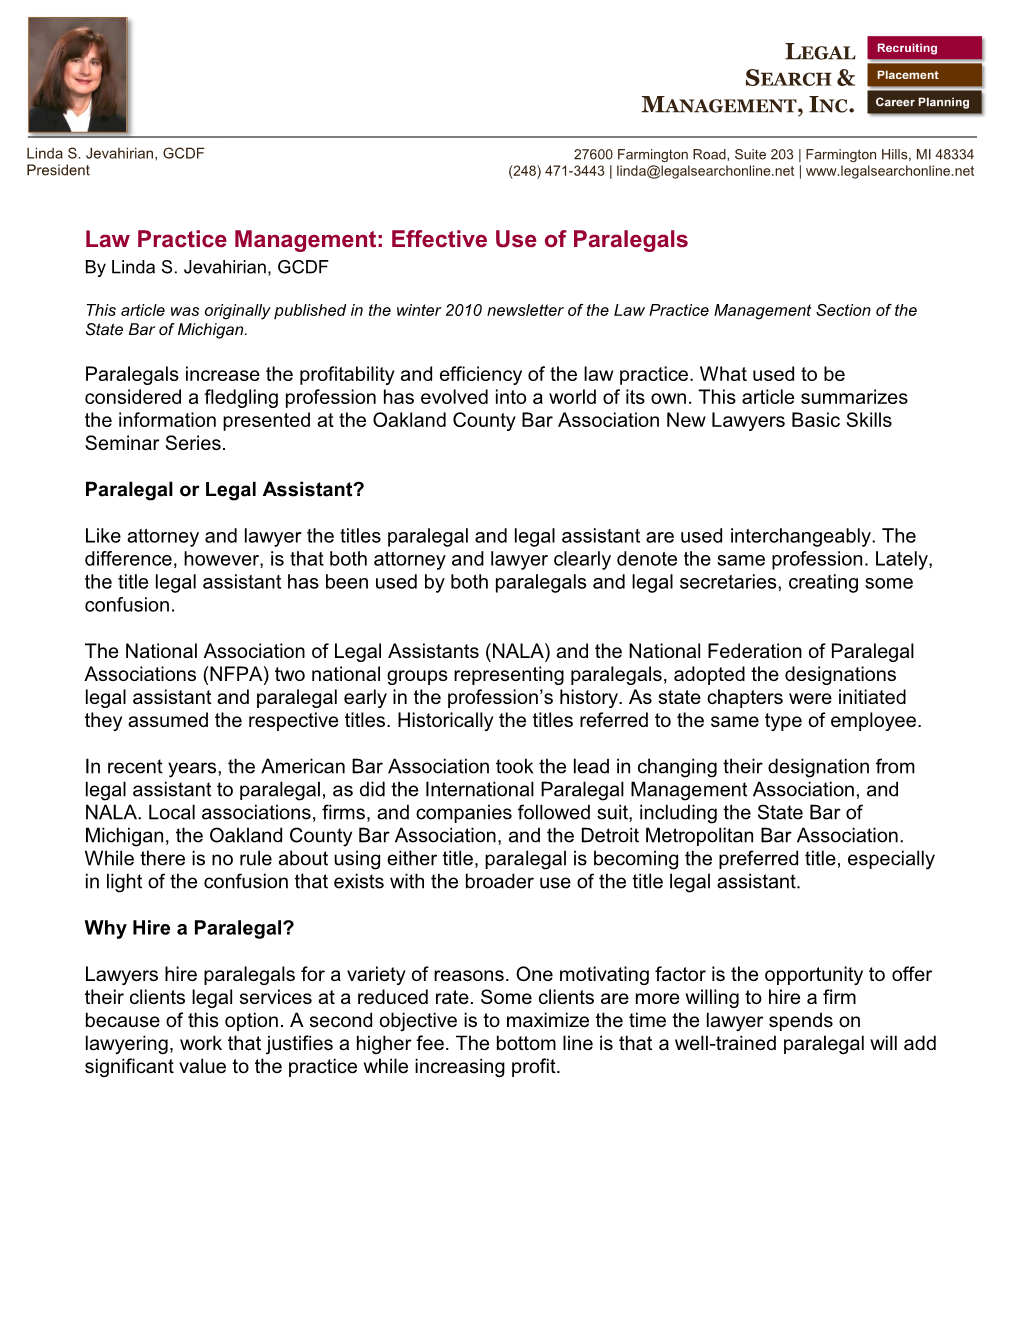 Law Practice Management: Effective Use of Paralegals by Linda S